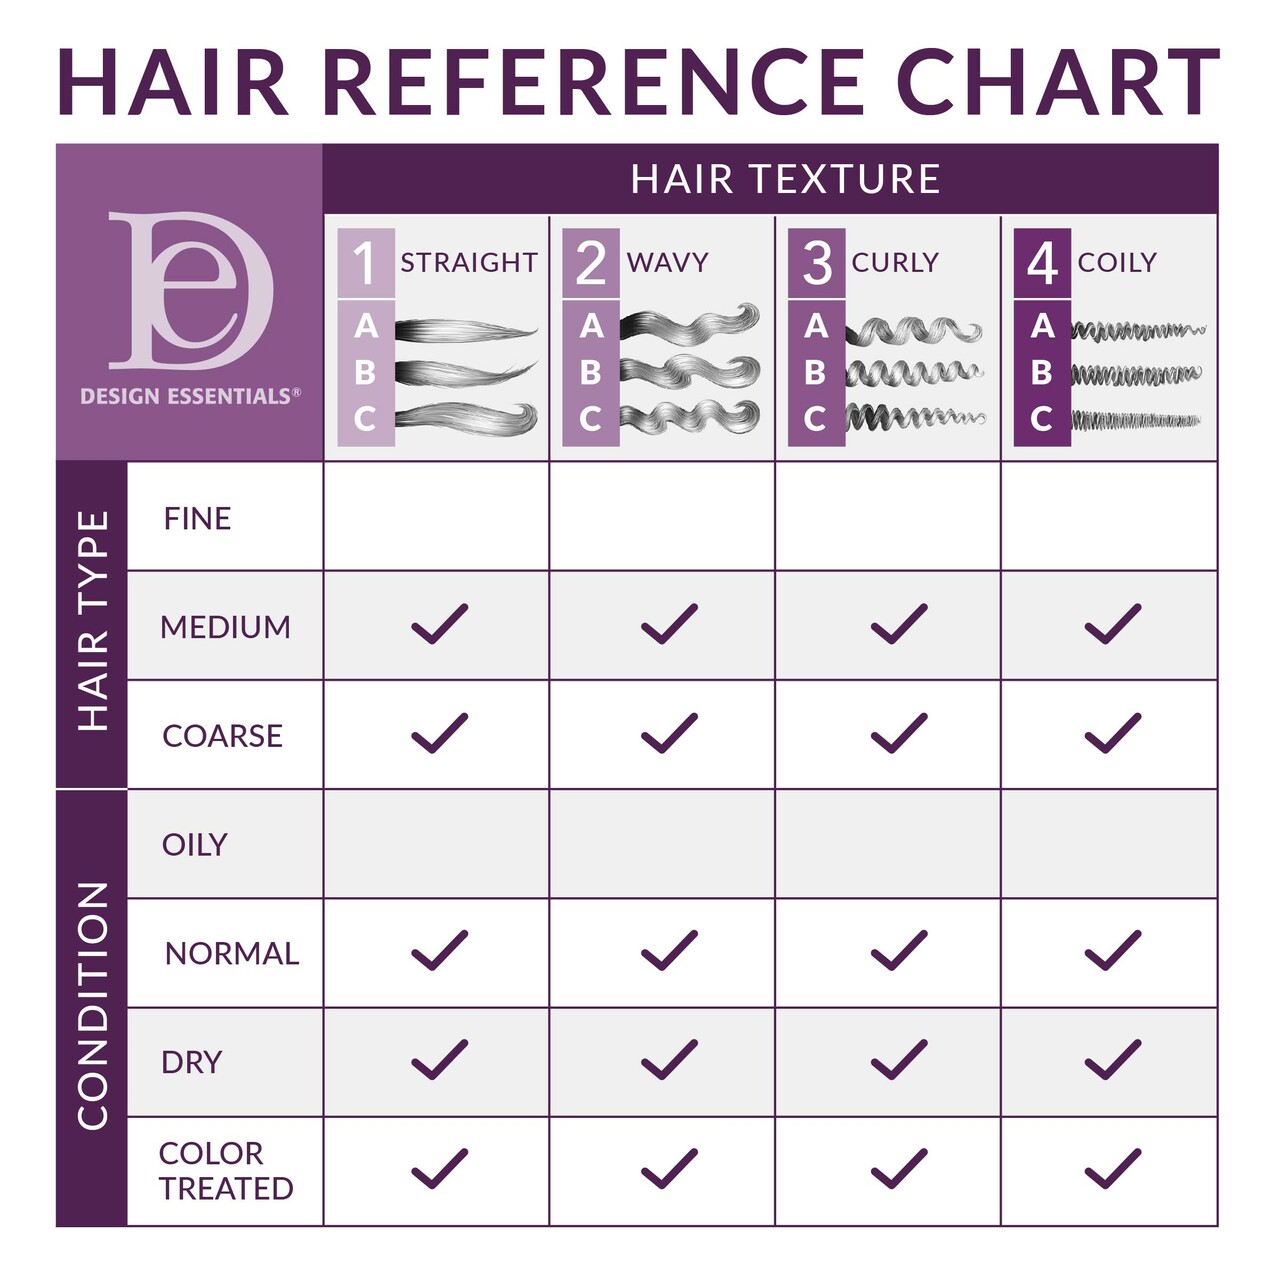 Botanical_Oils_Hair_and_Body_Moisturizer_-_Hair_Reference_Chart__88297.1578628597